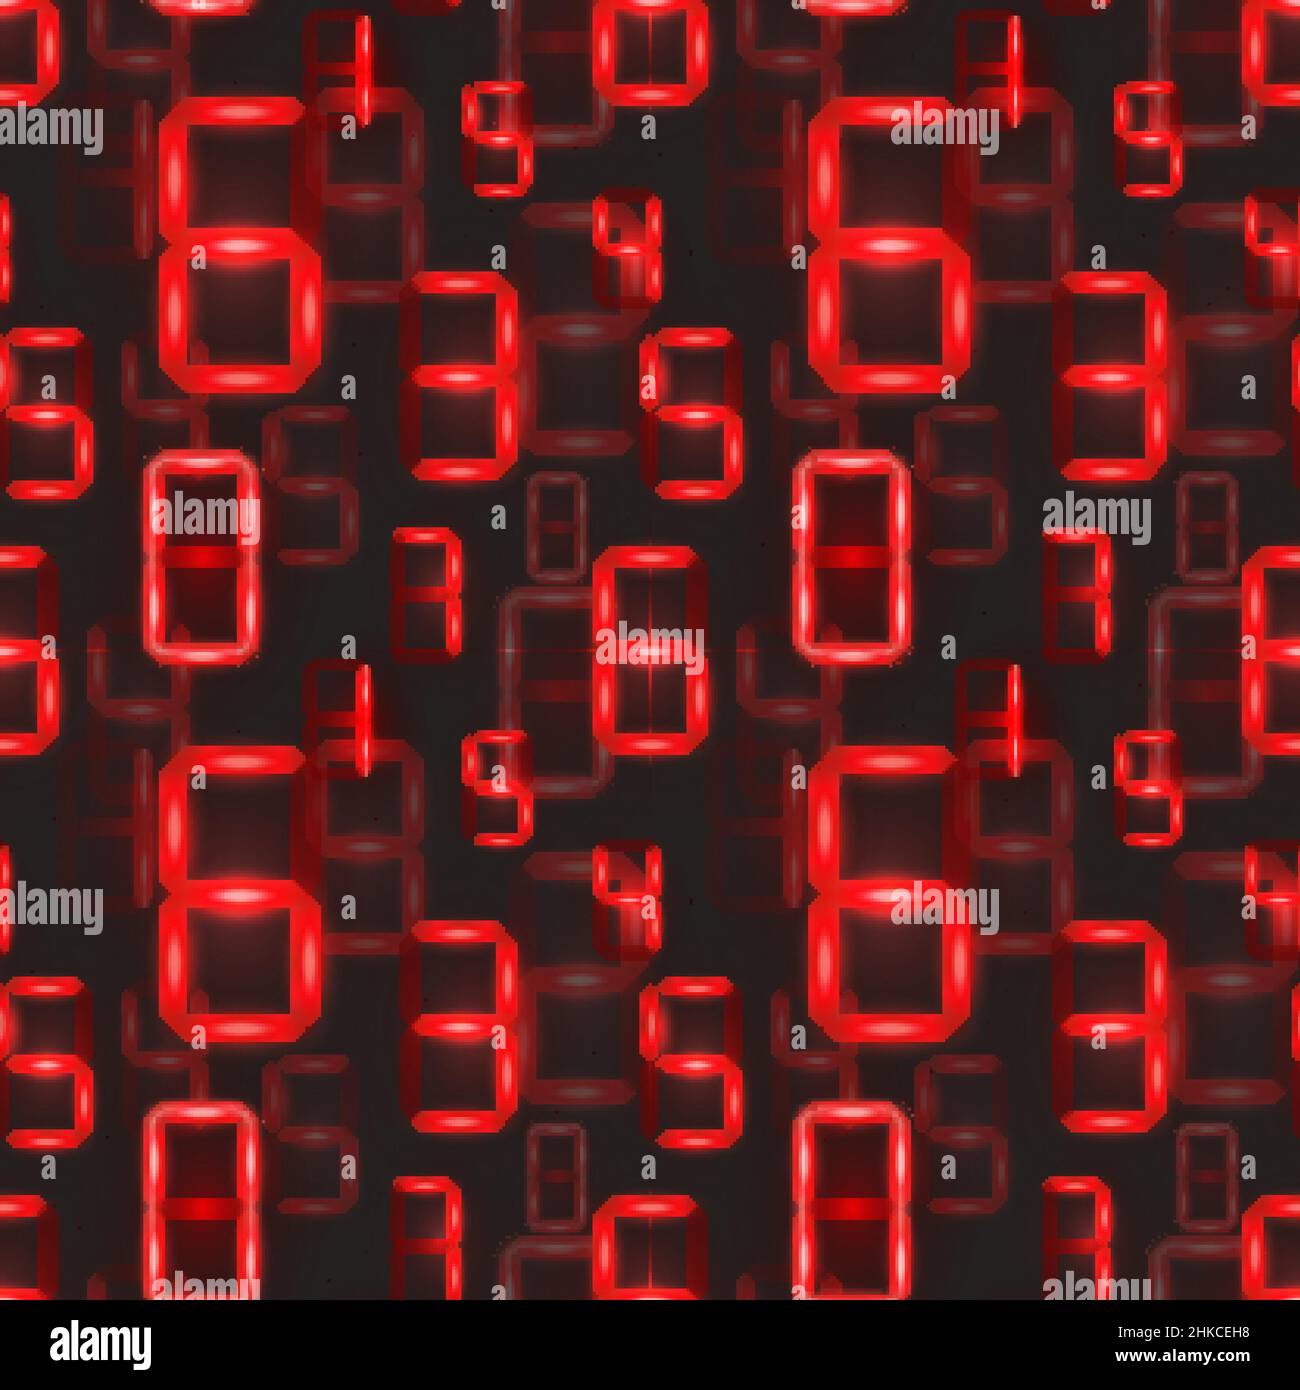 Lot of bright red vintage digital led numbers, seamless pattern on dark background Stock Vector